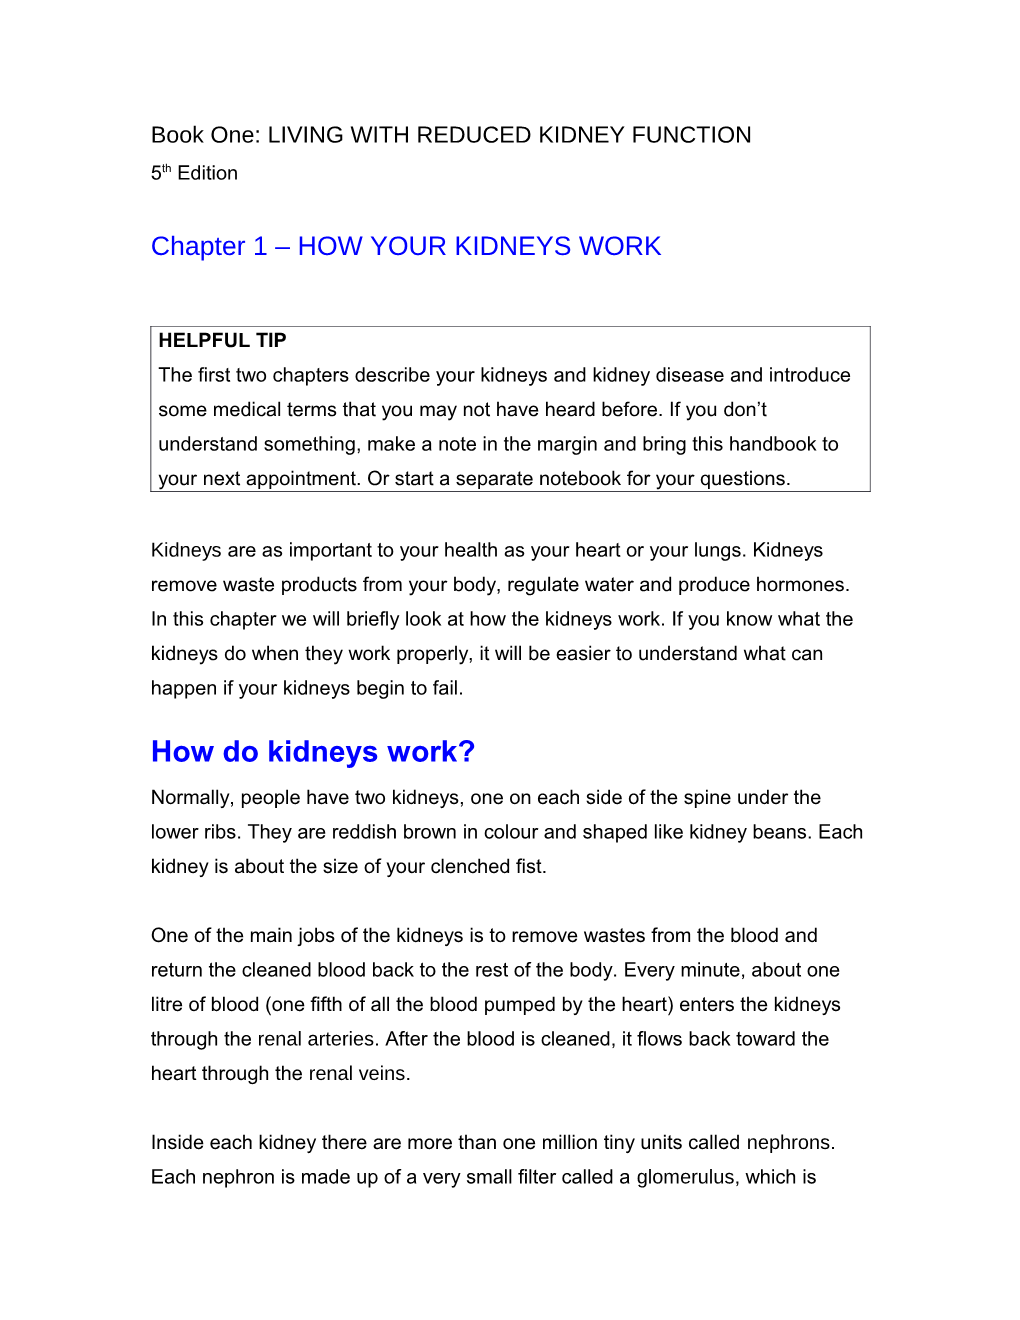 CHAPTER ONE How Your Kidneys Work